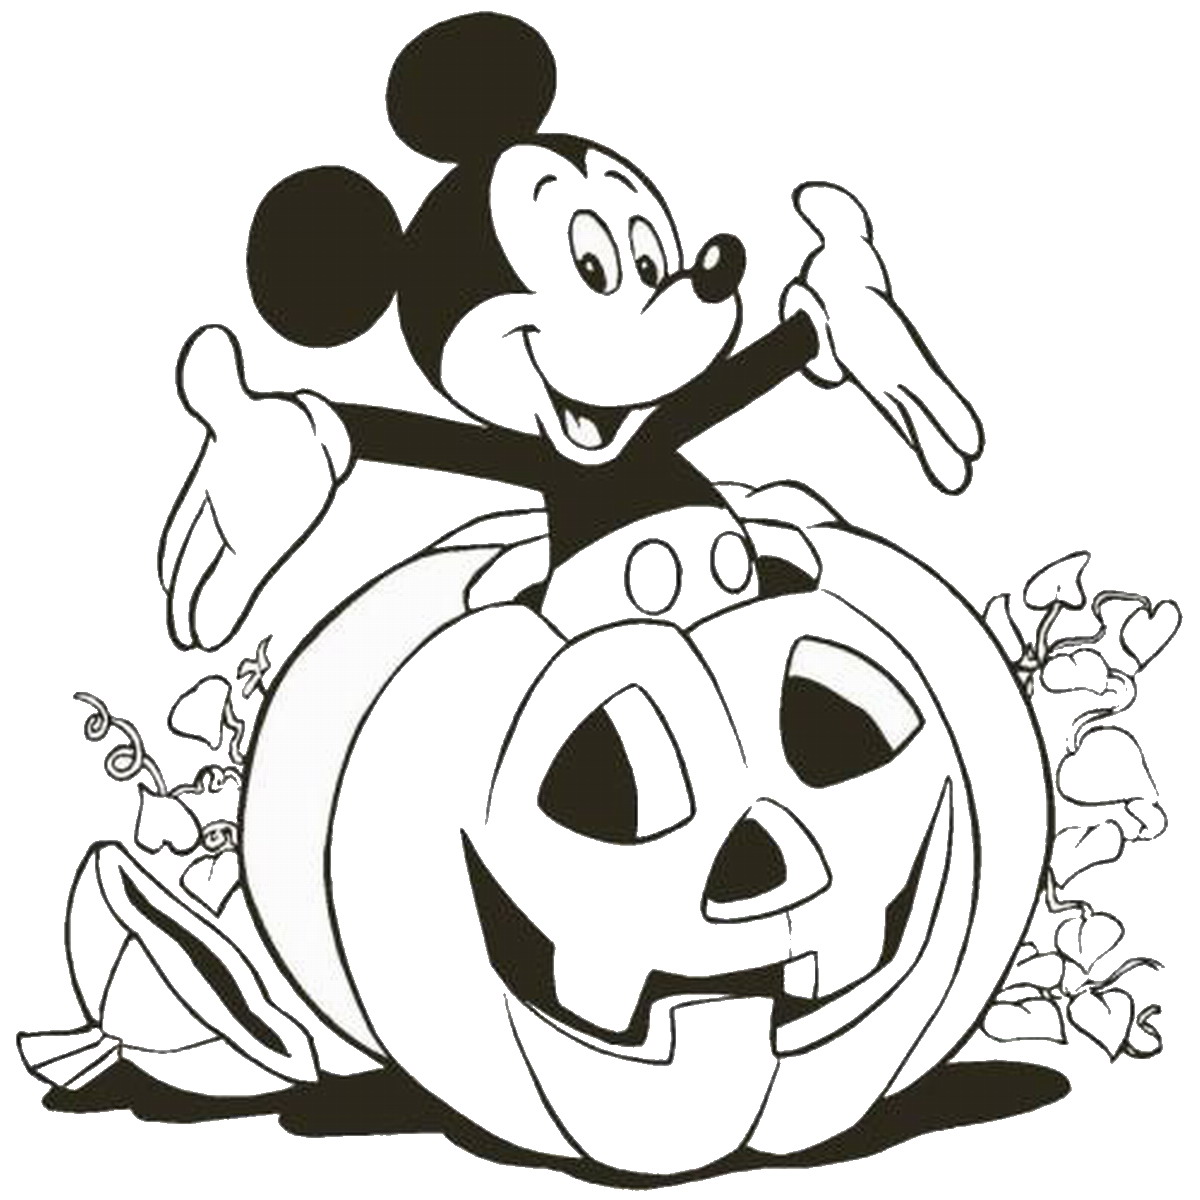 30 Halloween pictures to print and color halloween coloring18 halloween coloring5 halloween coloring11